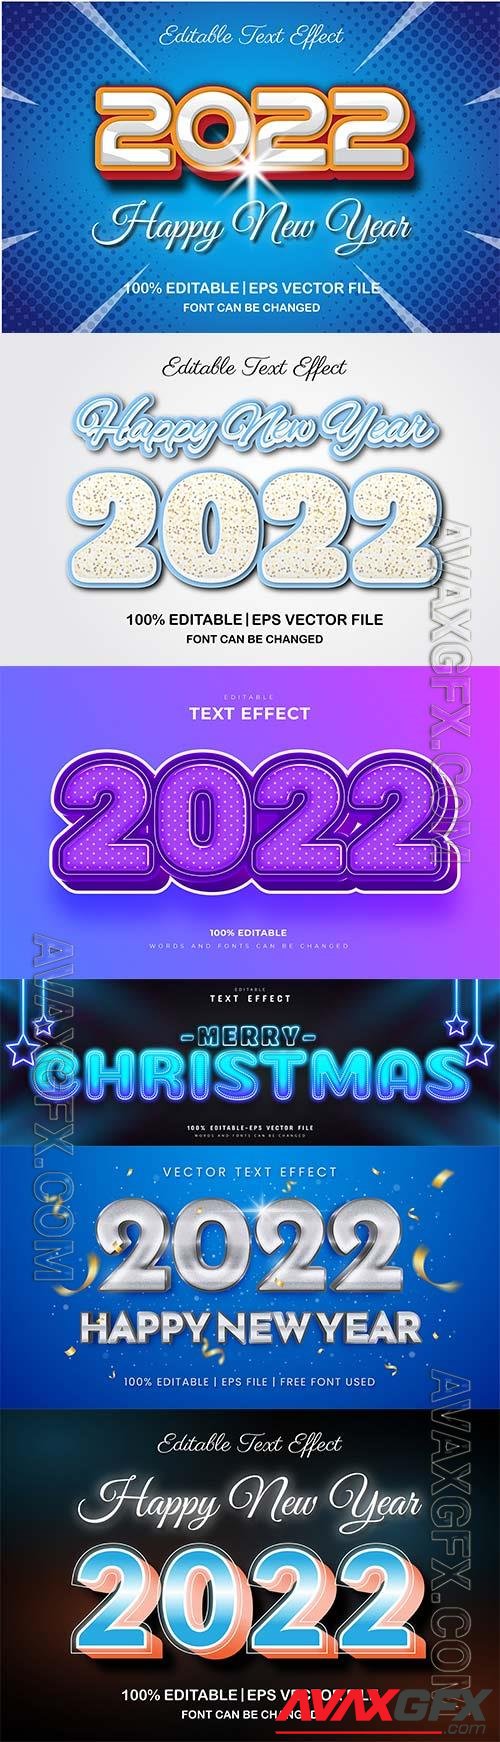 Merry christmas and happy new year 2022 editable vector text effects vol 15